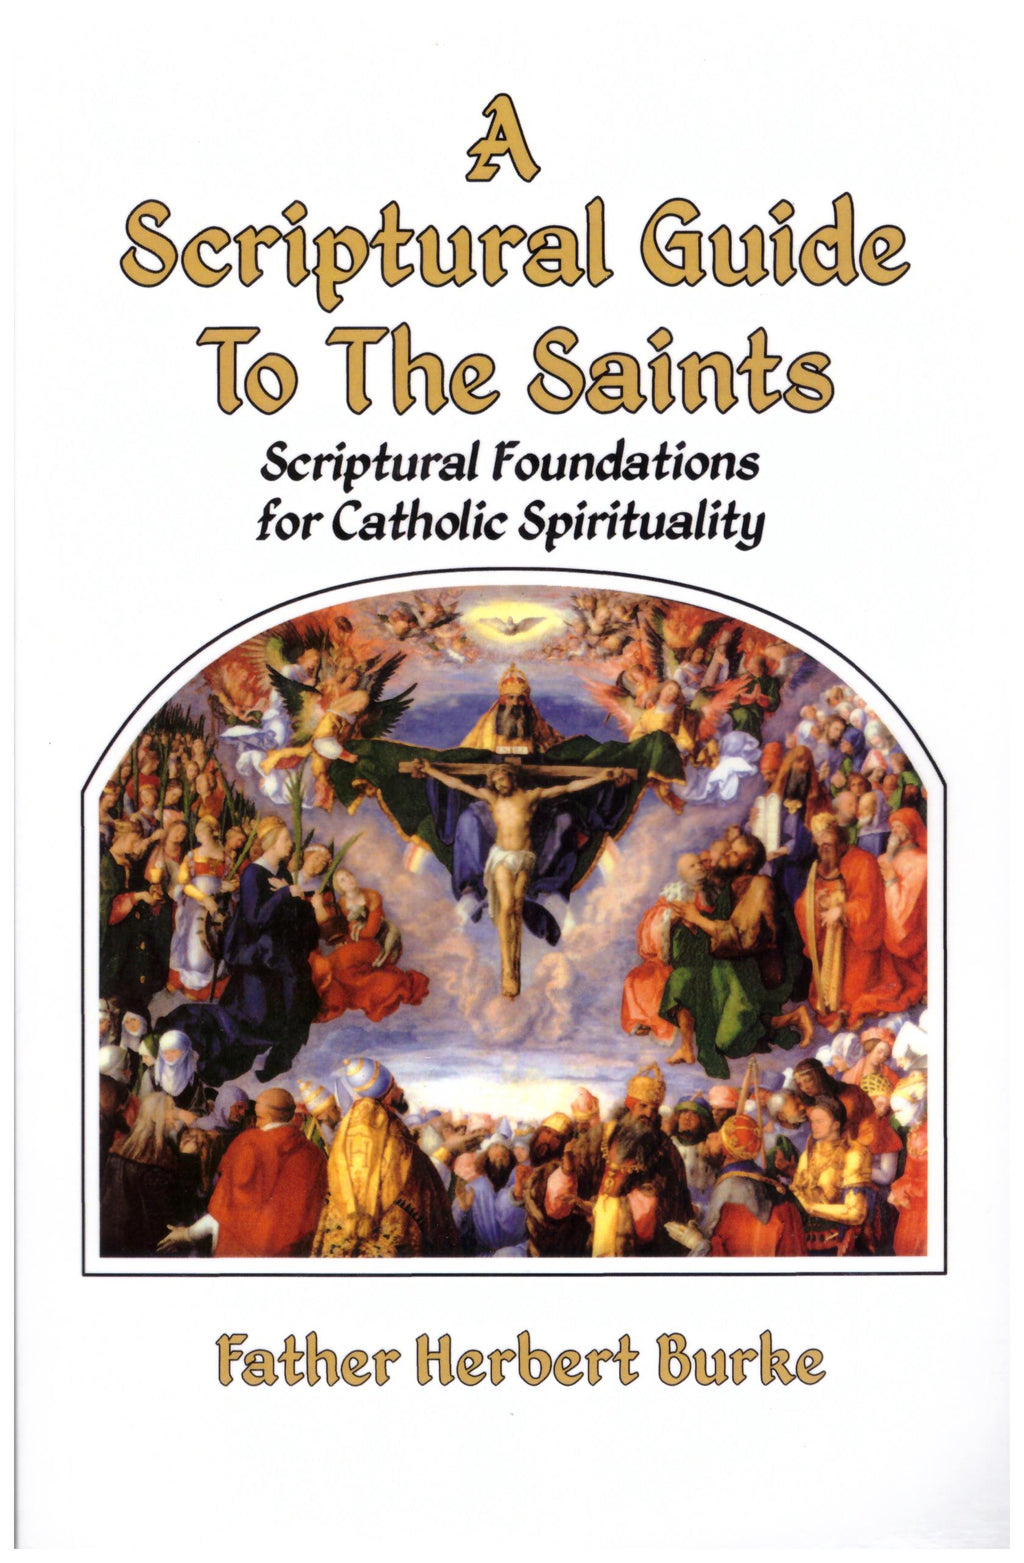 A Scriptural Guide To The Saints: Scriptural Foundations for Catholic Spirituality. Book cover shows the saints looking at Jesus on the cross. 